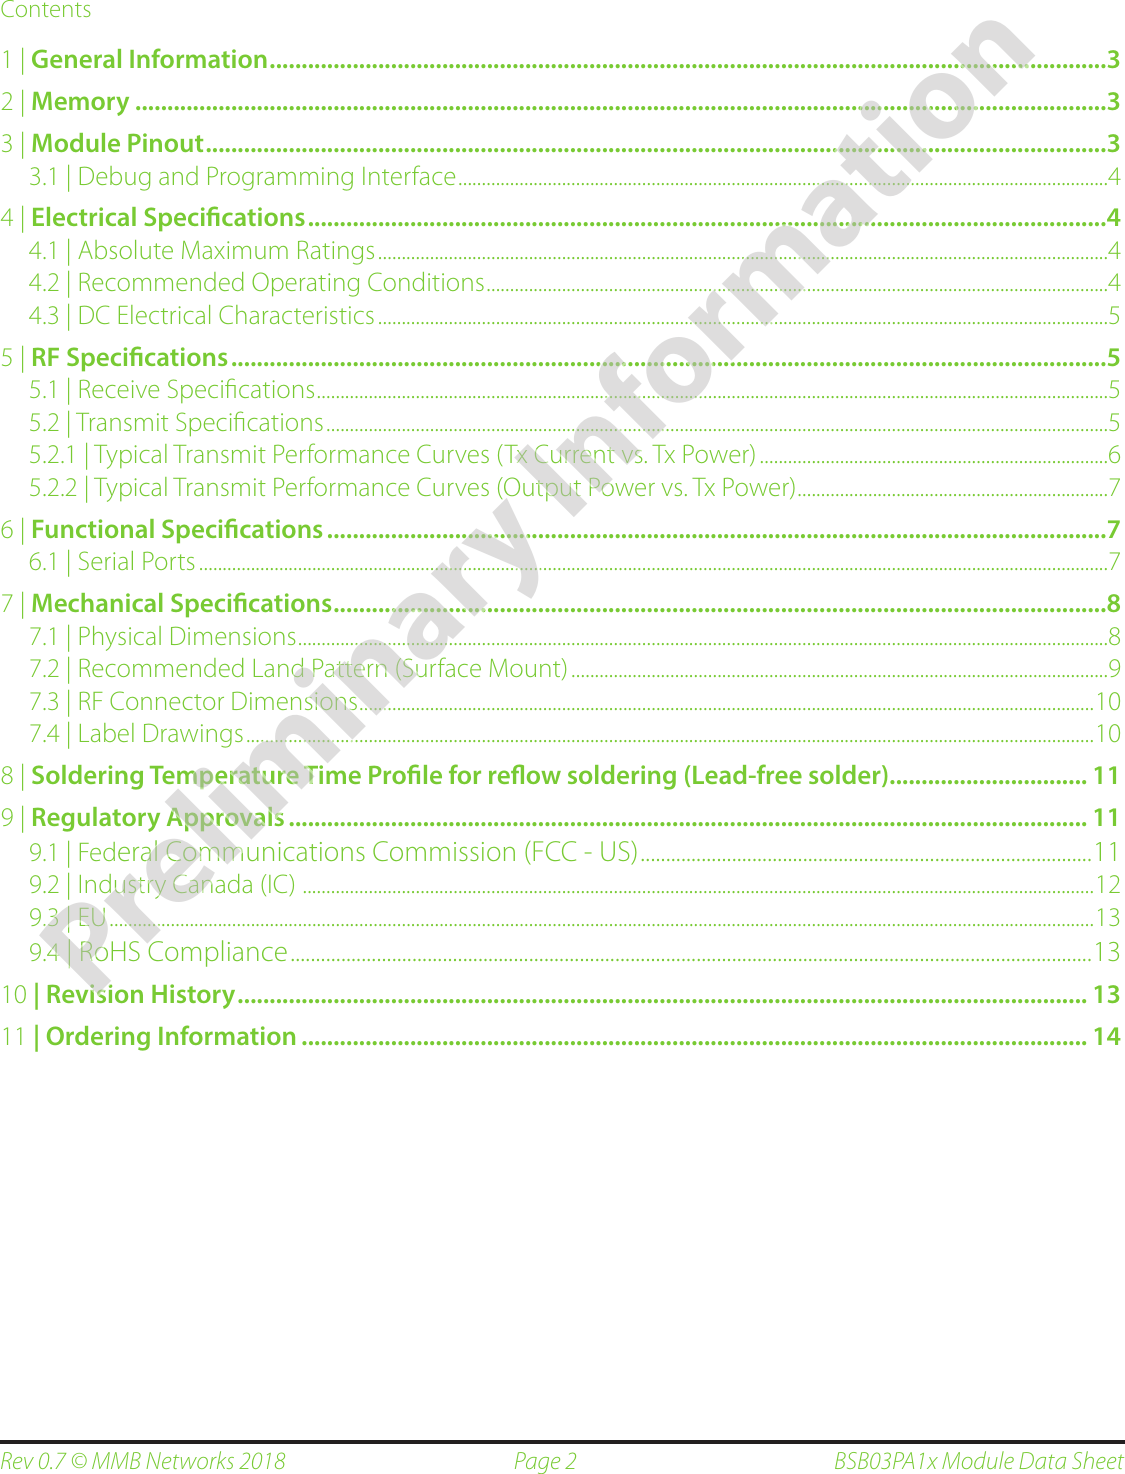 Page 2Rev 0.7 © MMB Networks 2018 BSB03PA1x Module Data SheetContents1 | General Information ...................................................................................................................................32 | Memory ........................................................................................................................................................33 | Module Pinout .............................................................................................................................................33.1 | Debug and Programming Interface  ..........................................................................................................................................44 | Electrical Specications .............................................................................................................................44.1 | Absolute Maximum Ratings  ...........................................................................................................................................................44.2 | Recommended Operating Conditions  ....................................................................................................................................44.3 | DC Electrical Characteristics  ...........................................................................................................................................................55 | RF Specications .........................................................................................................................................55.1 | Receive Speciﬁcations  ........................................................................................................................................................................55.2 | Transmit Speciﬁcations  ......................................................................................................................................................................55.2.1 | Typical Transmit Performance Curves  (Tx Current vs. Tx Power) ..........................................................................65.2.2 | Typical Transmit Performance Curves  (Output Power vs. Tx Power) ..................................................................76 | Functional Specications ..........................................................................................................................76.1 | Serial Ports  .................................................................................................................................................................................................77 | Mechanical Specications .........................................................................................................................87.1 | Physical Dimensions  ............................................................................................................................................................................87.2 | Recommended Land Pattern (Surface Mount)  ..................................................................................................................97.3 | RF Connector Dimensions ............................................................................................................................................................ 107.4 | Label Drawings ....................................................................................................................................................................................108 | Soldering Temperature Time Prole for reow soldering (Lead-free solder)............................... 119 | Regulatory Approvals ............................................................................................................................. 119.1 | Federal Communications Commission (FCC - US)  .........................................................................................119.2 | Industry Canada (IC)   ........................................................................................................................................................................ 129.3 | EU  .................................................................................................................................................................................................................139.4 | RoHS Compliance  ..............................................................................................................................................................1310 | Revision History ..................................................................................................................................... 1311 | Ordering Information ........................................................................................................................... 14Preliminary Information